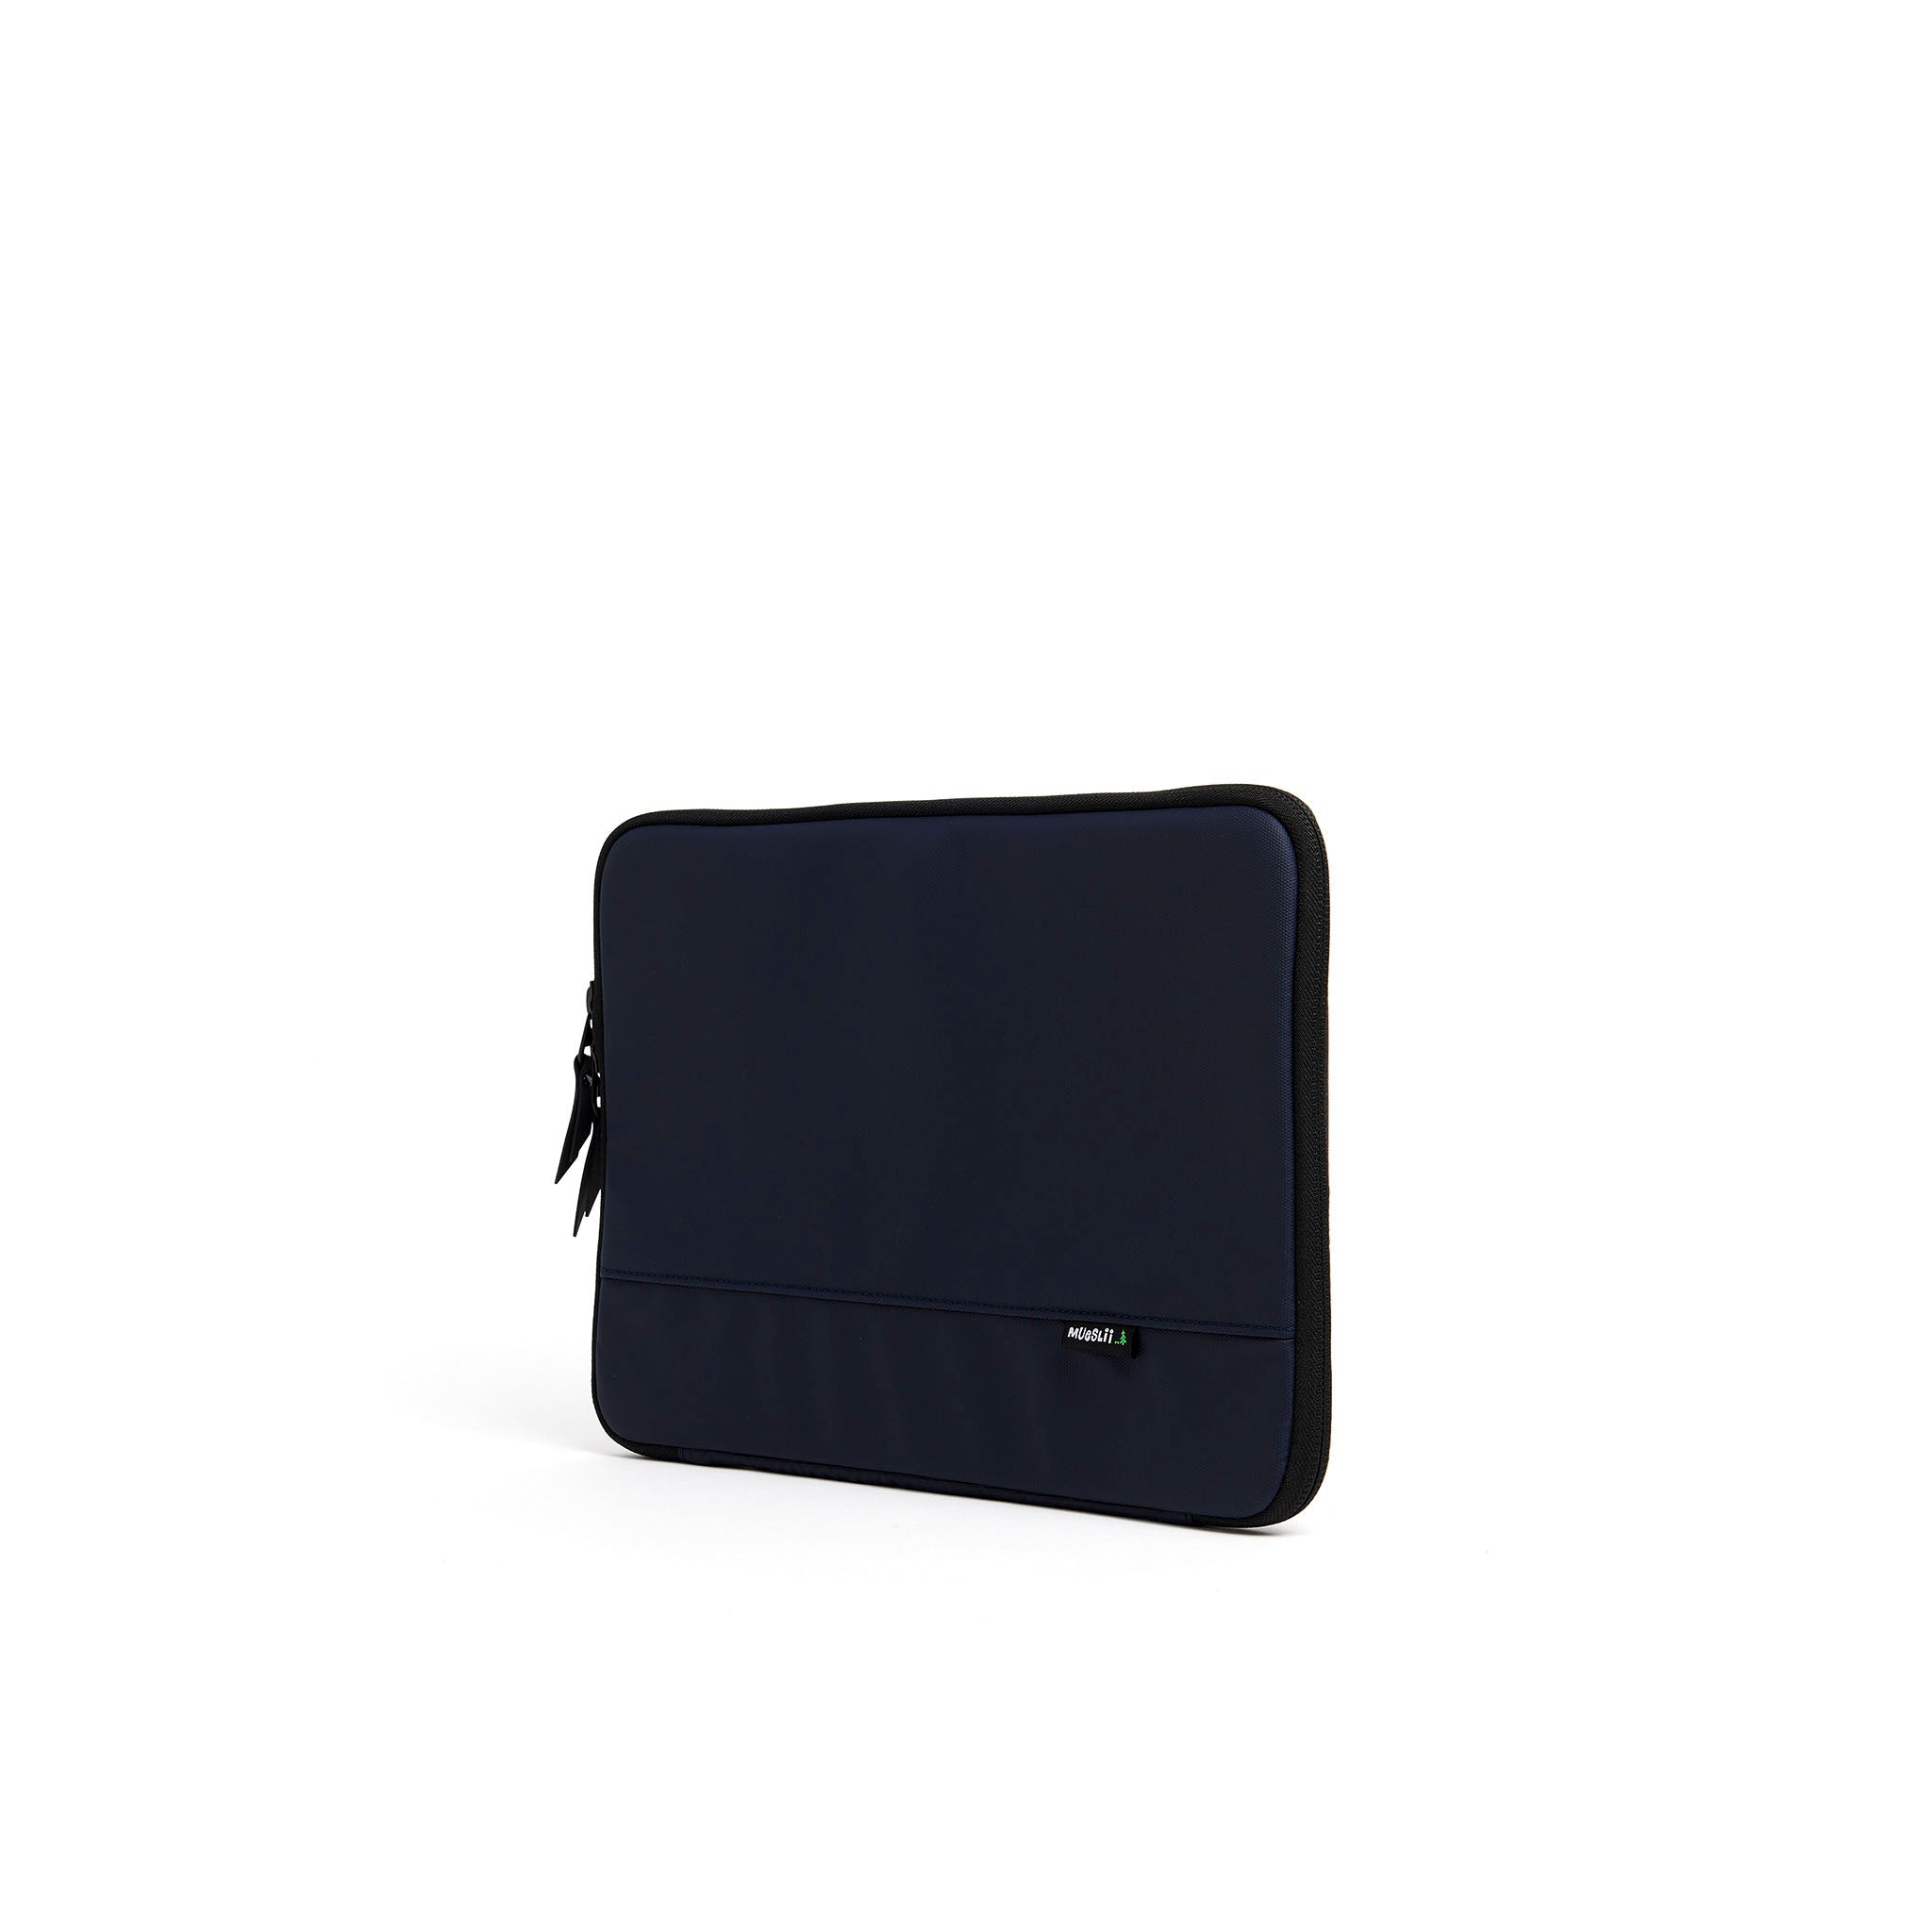 Mueslii A4 document- tech holder,  made of PU coated waterproof nylon, color midnight blue, side view.